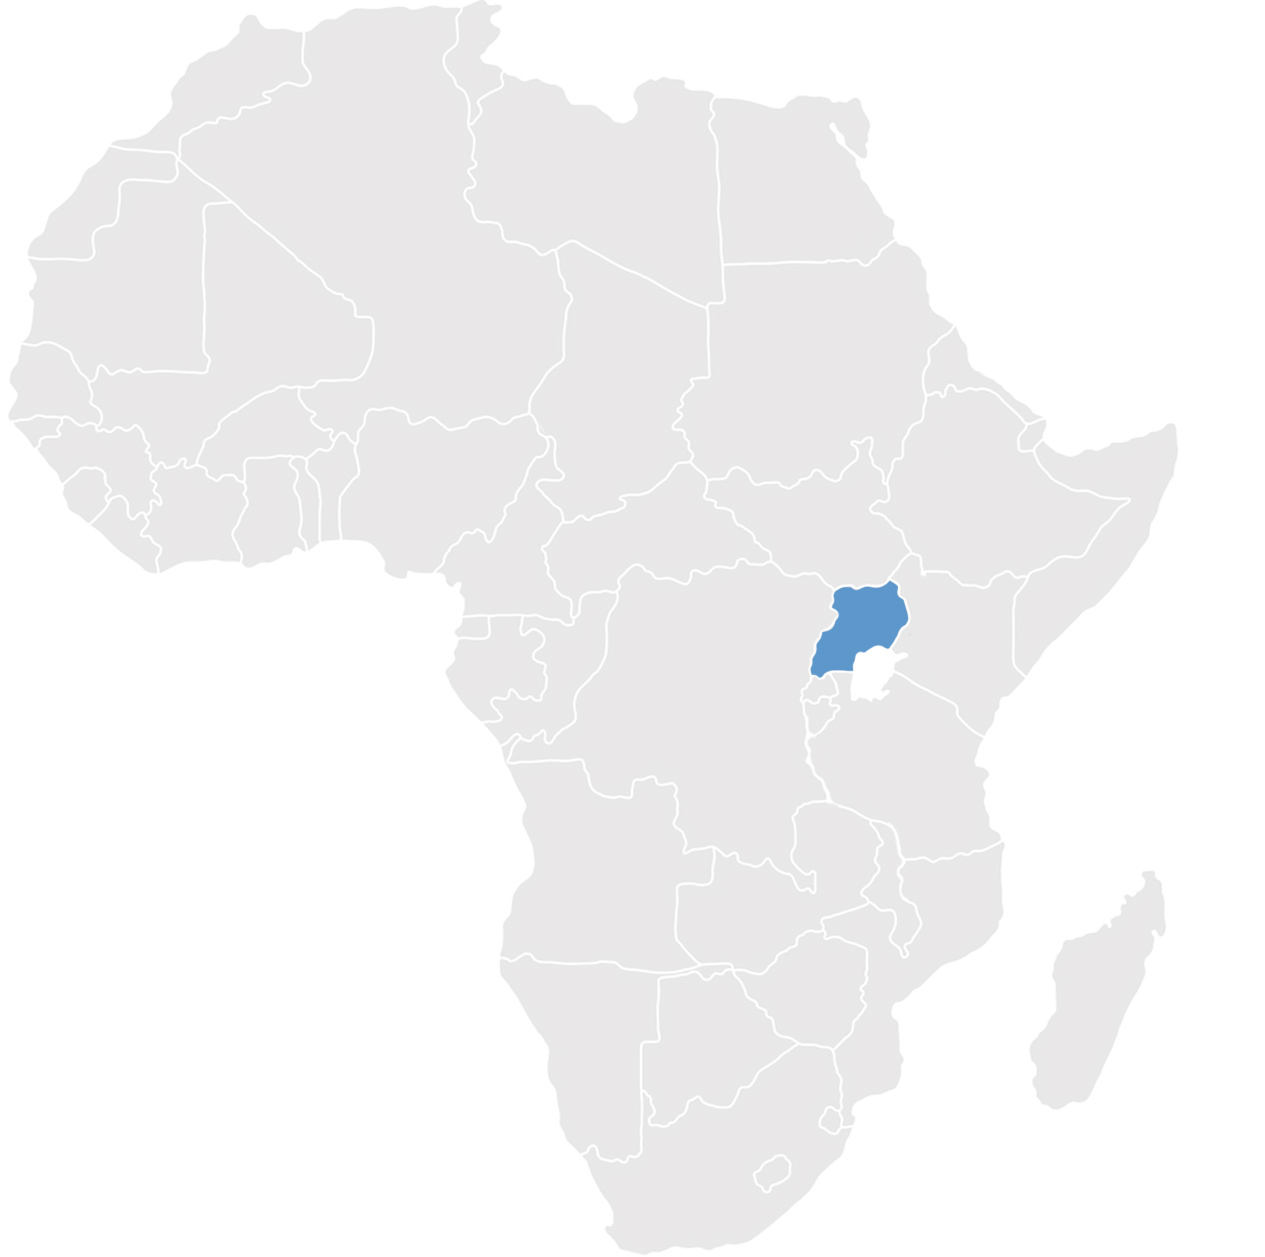 Gray map of Africa with Uganda in blue